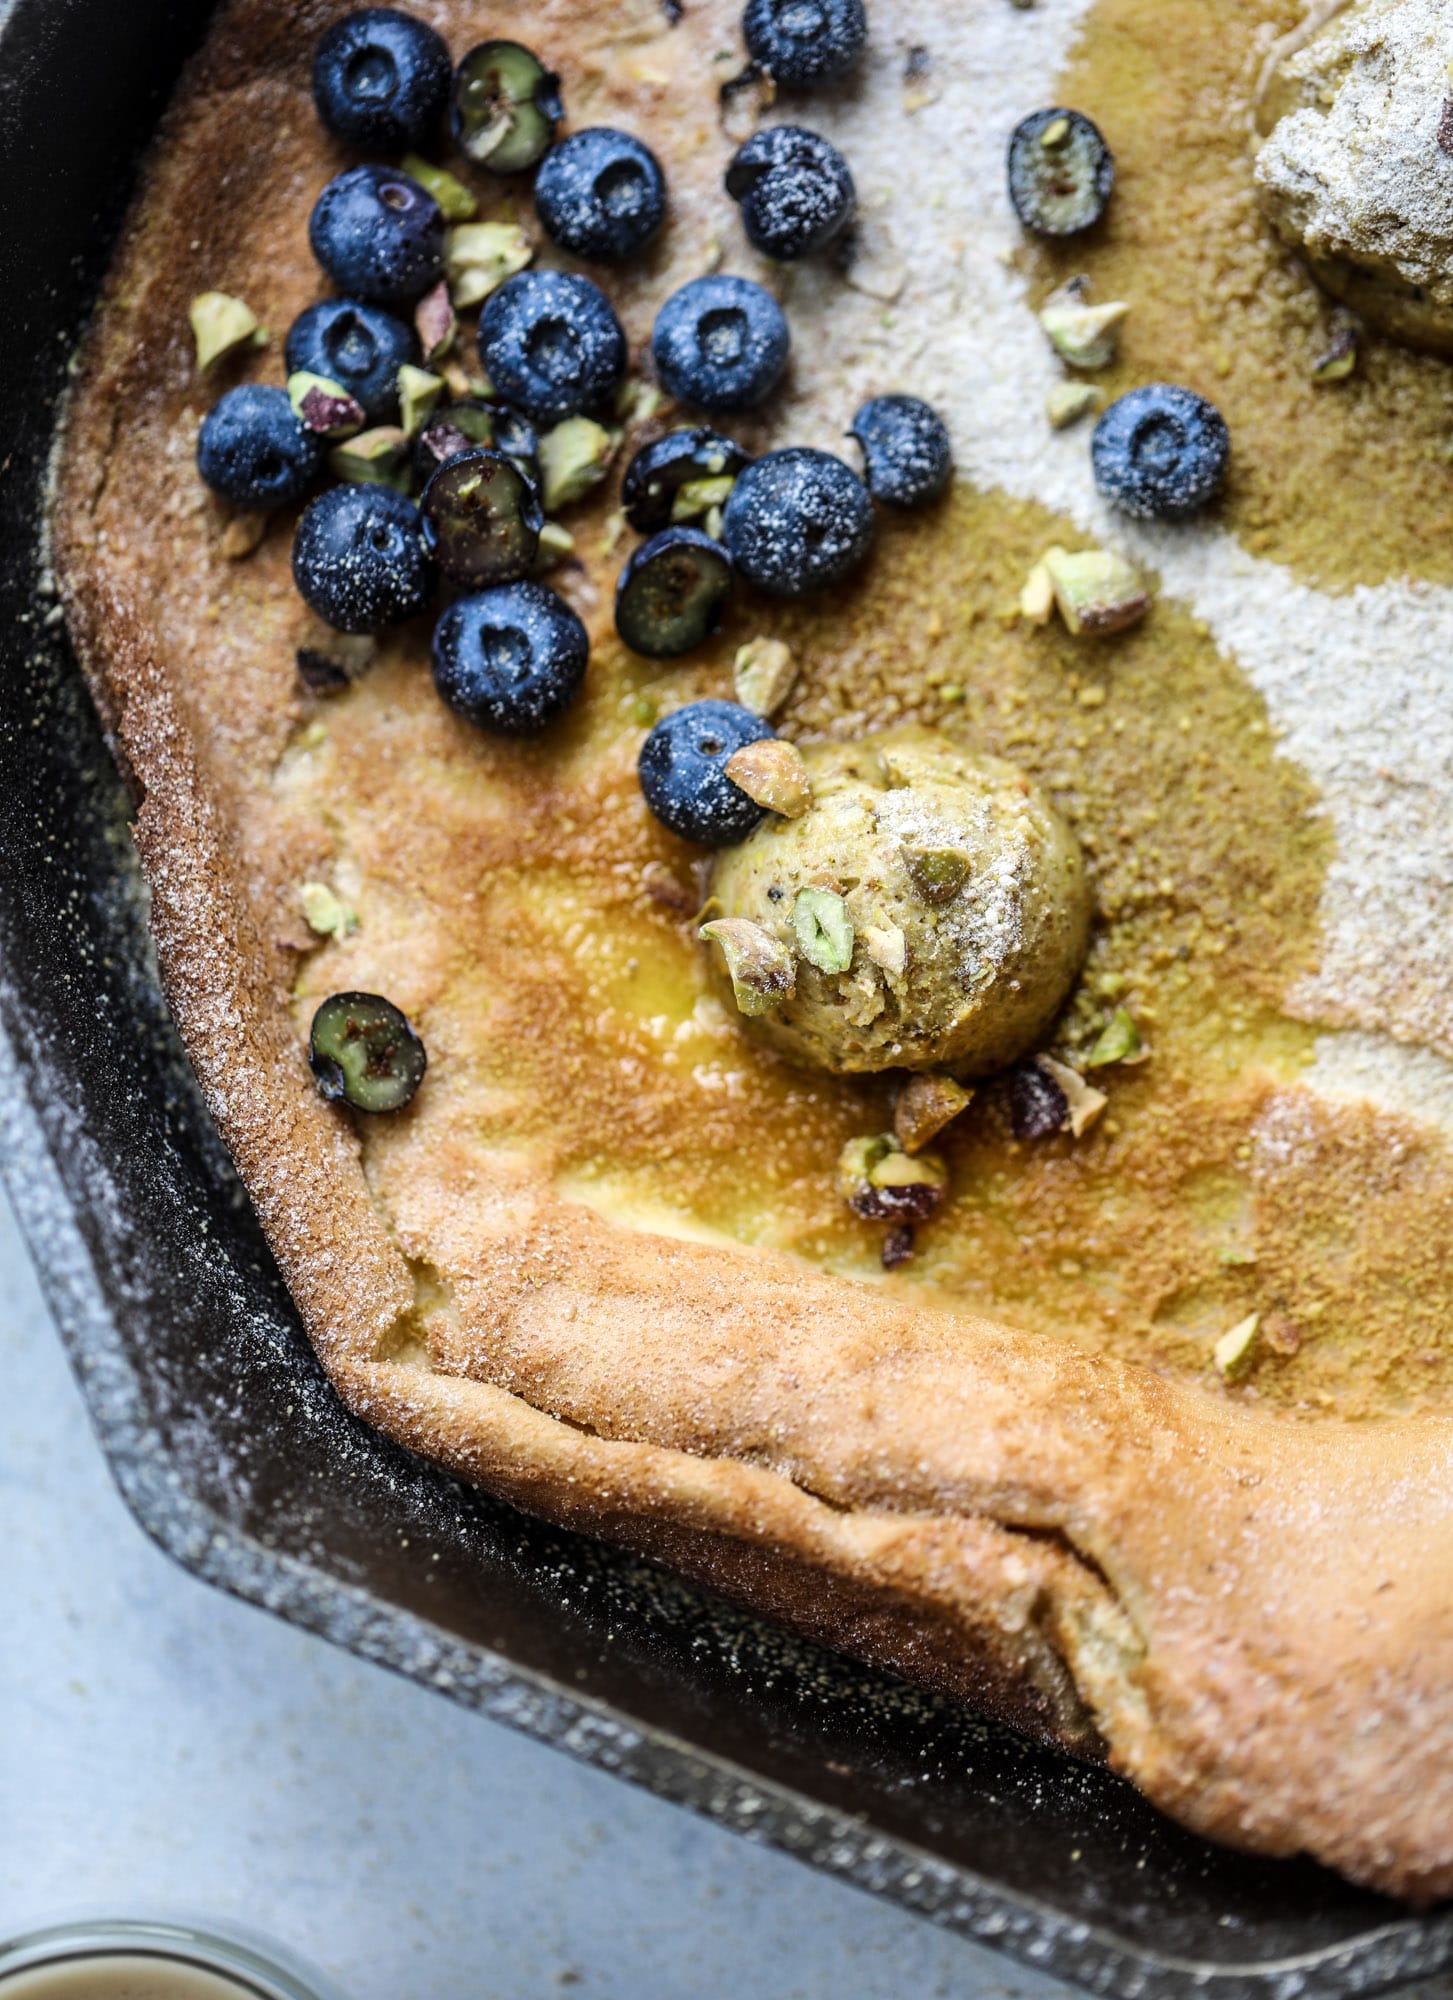 This incredible dutch baby recipe is fluffy and light and perfect for breakfast! It's sprinkled with pistachio sugar and served with pistachio butter and fresh blueberries. It's super easy, simple and always a hit! I howsweeteats.com #dutch #baby #pistachio #blueberry #breakfast